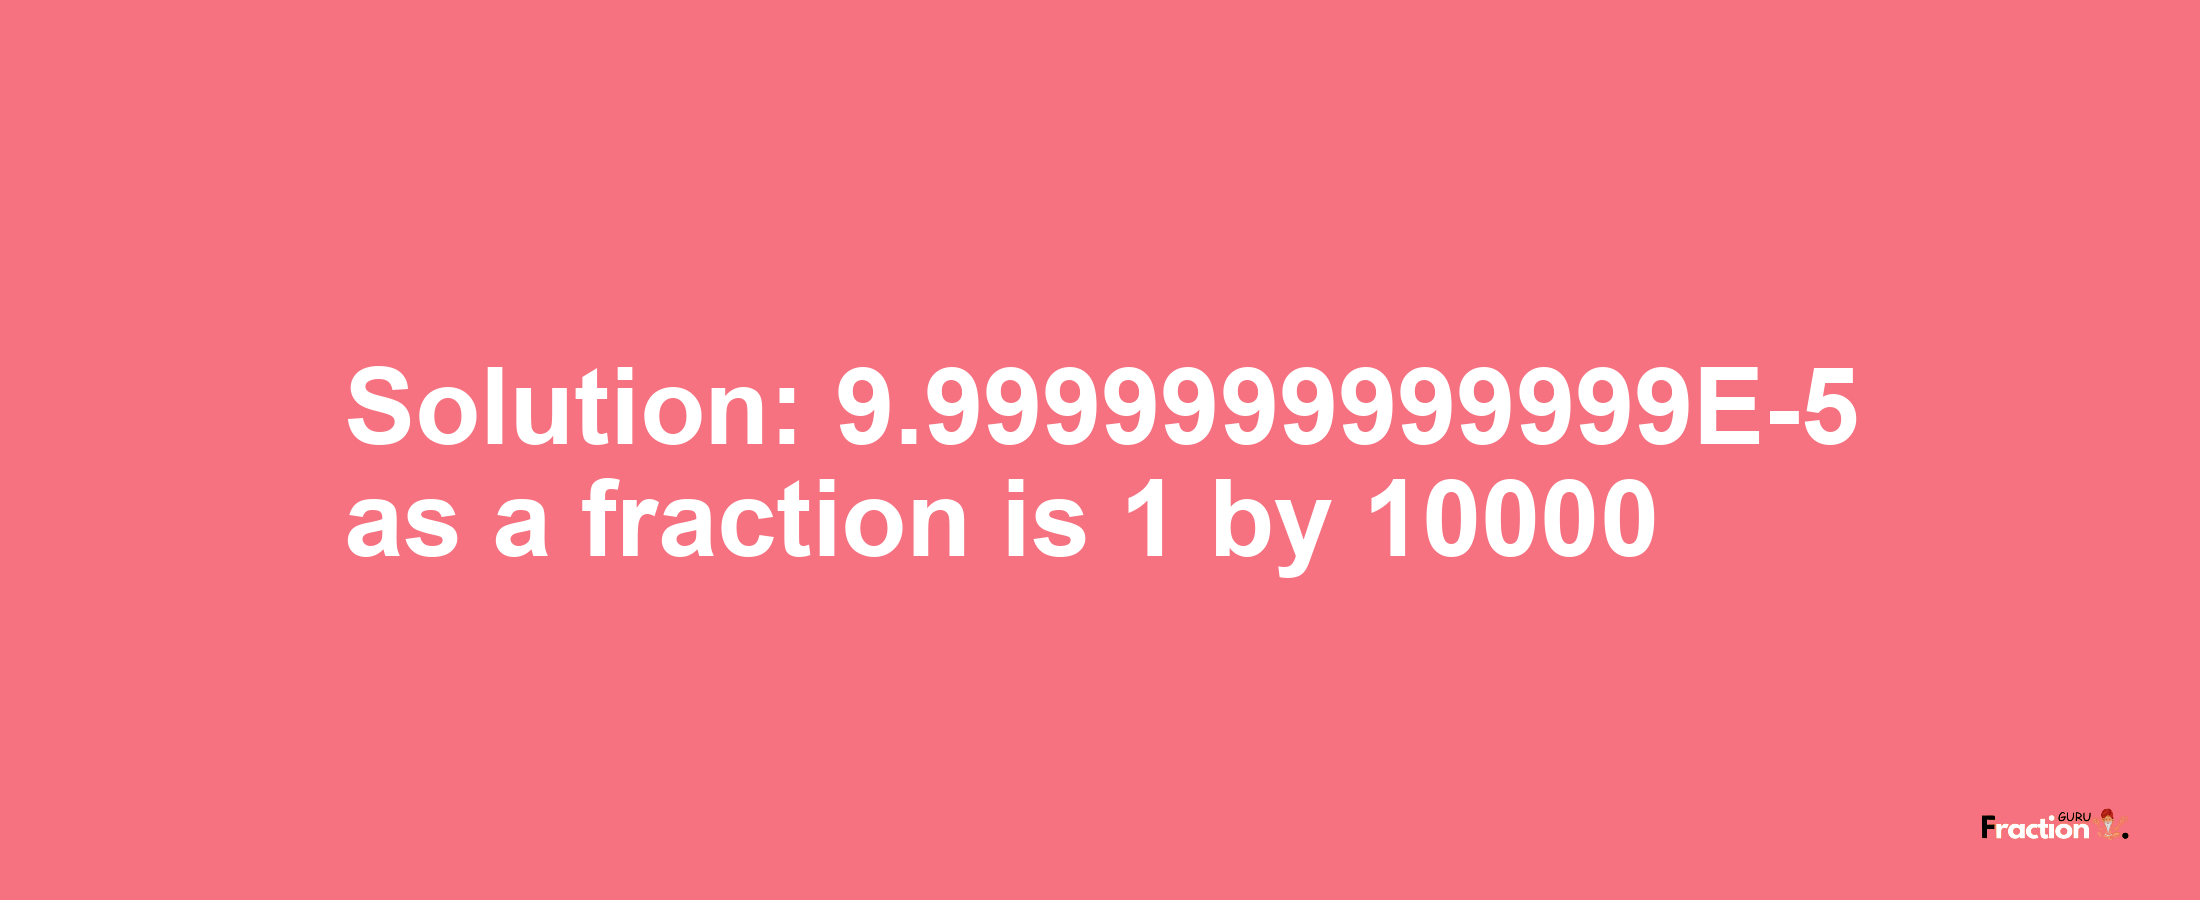 Solution:9.9999999999999E-5 as a fraction is 1/10000